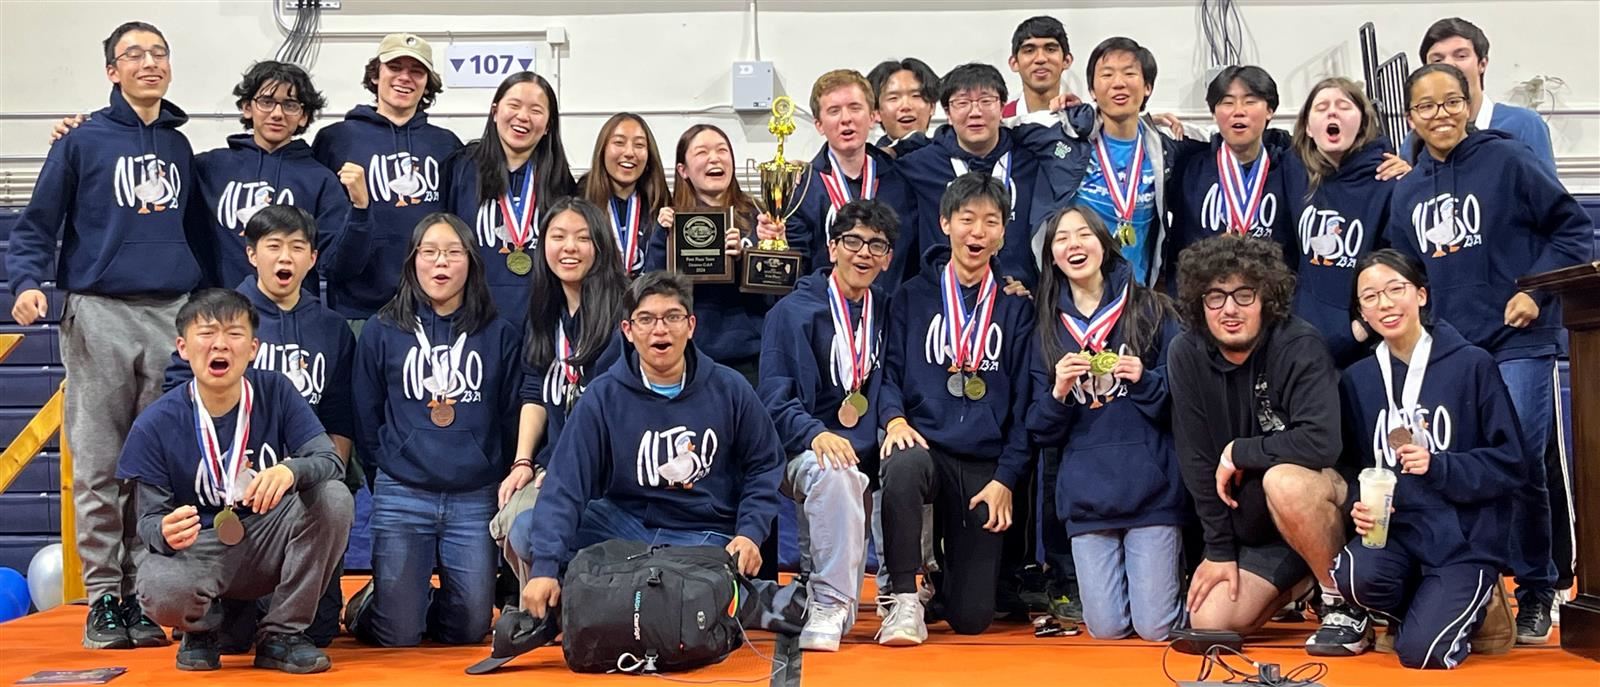  Science Olympiad team celebrates 1st place at State Tournament